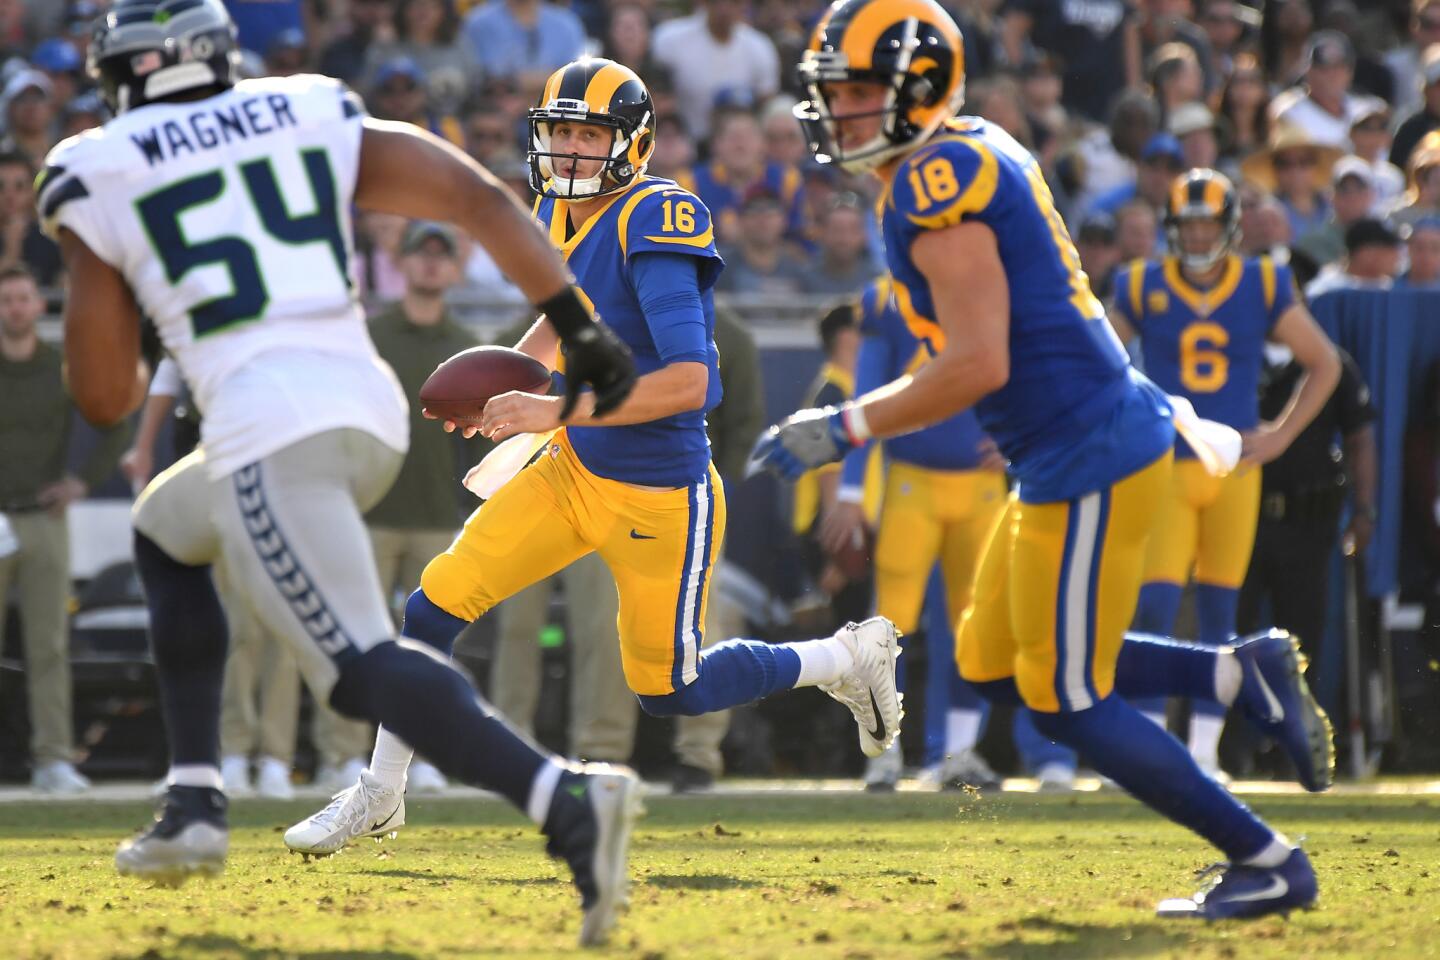 Rams quarterback Jared Goff scrambles for yards against the Seattle Seahawks at the Coliseum on Sunday.